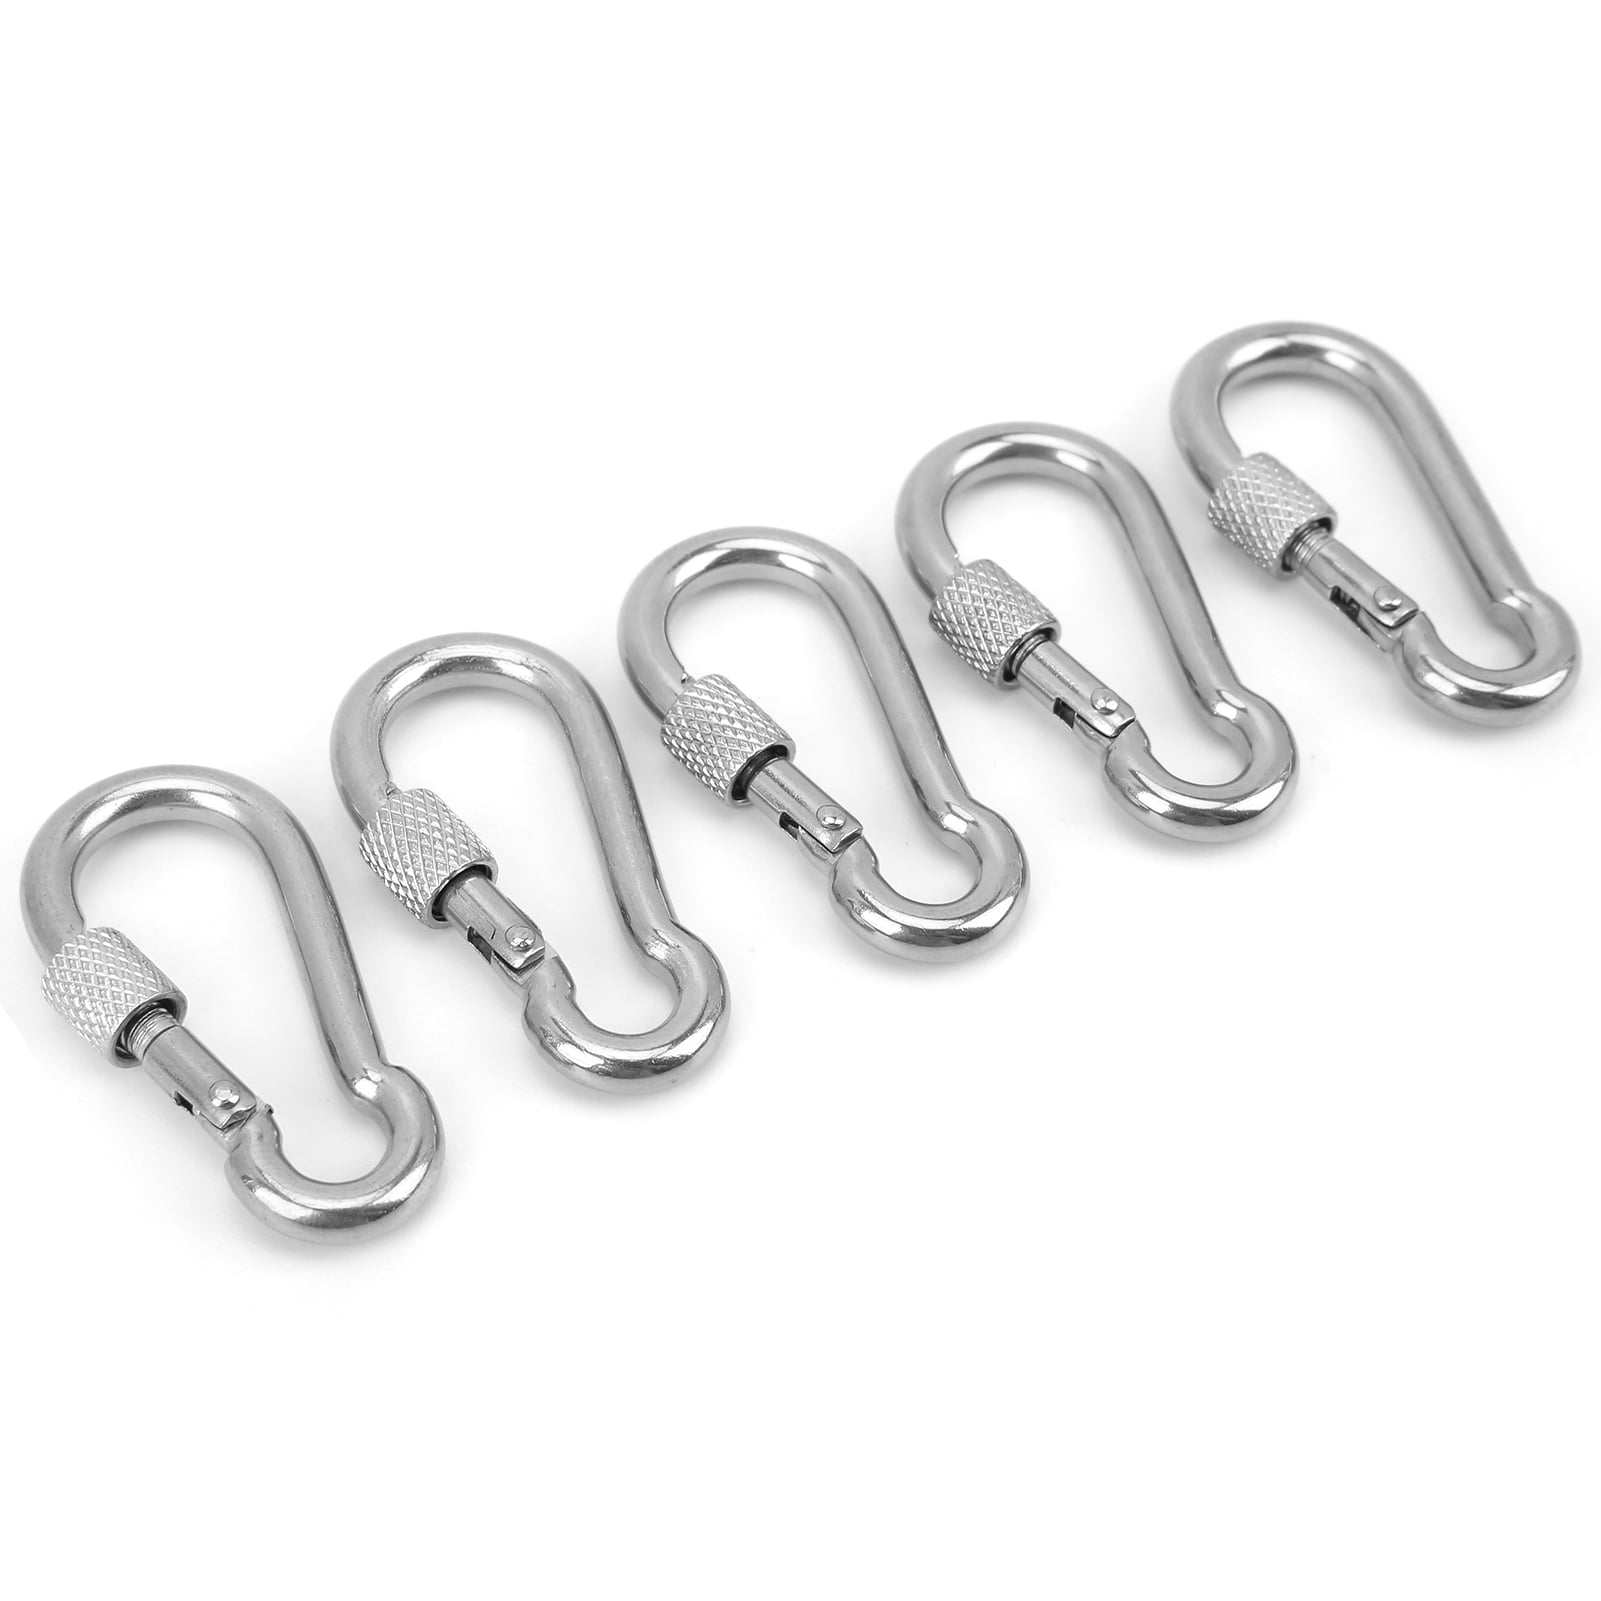 Stainless Spring Snap Hook Buckle Carabiner for Camping Heavy Duty 50mm 